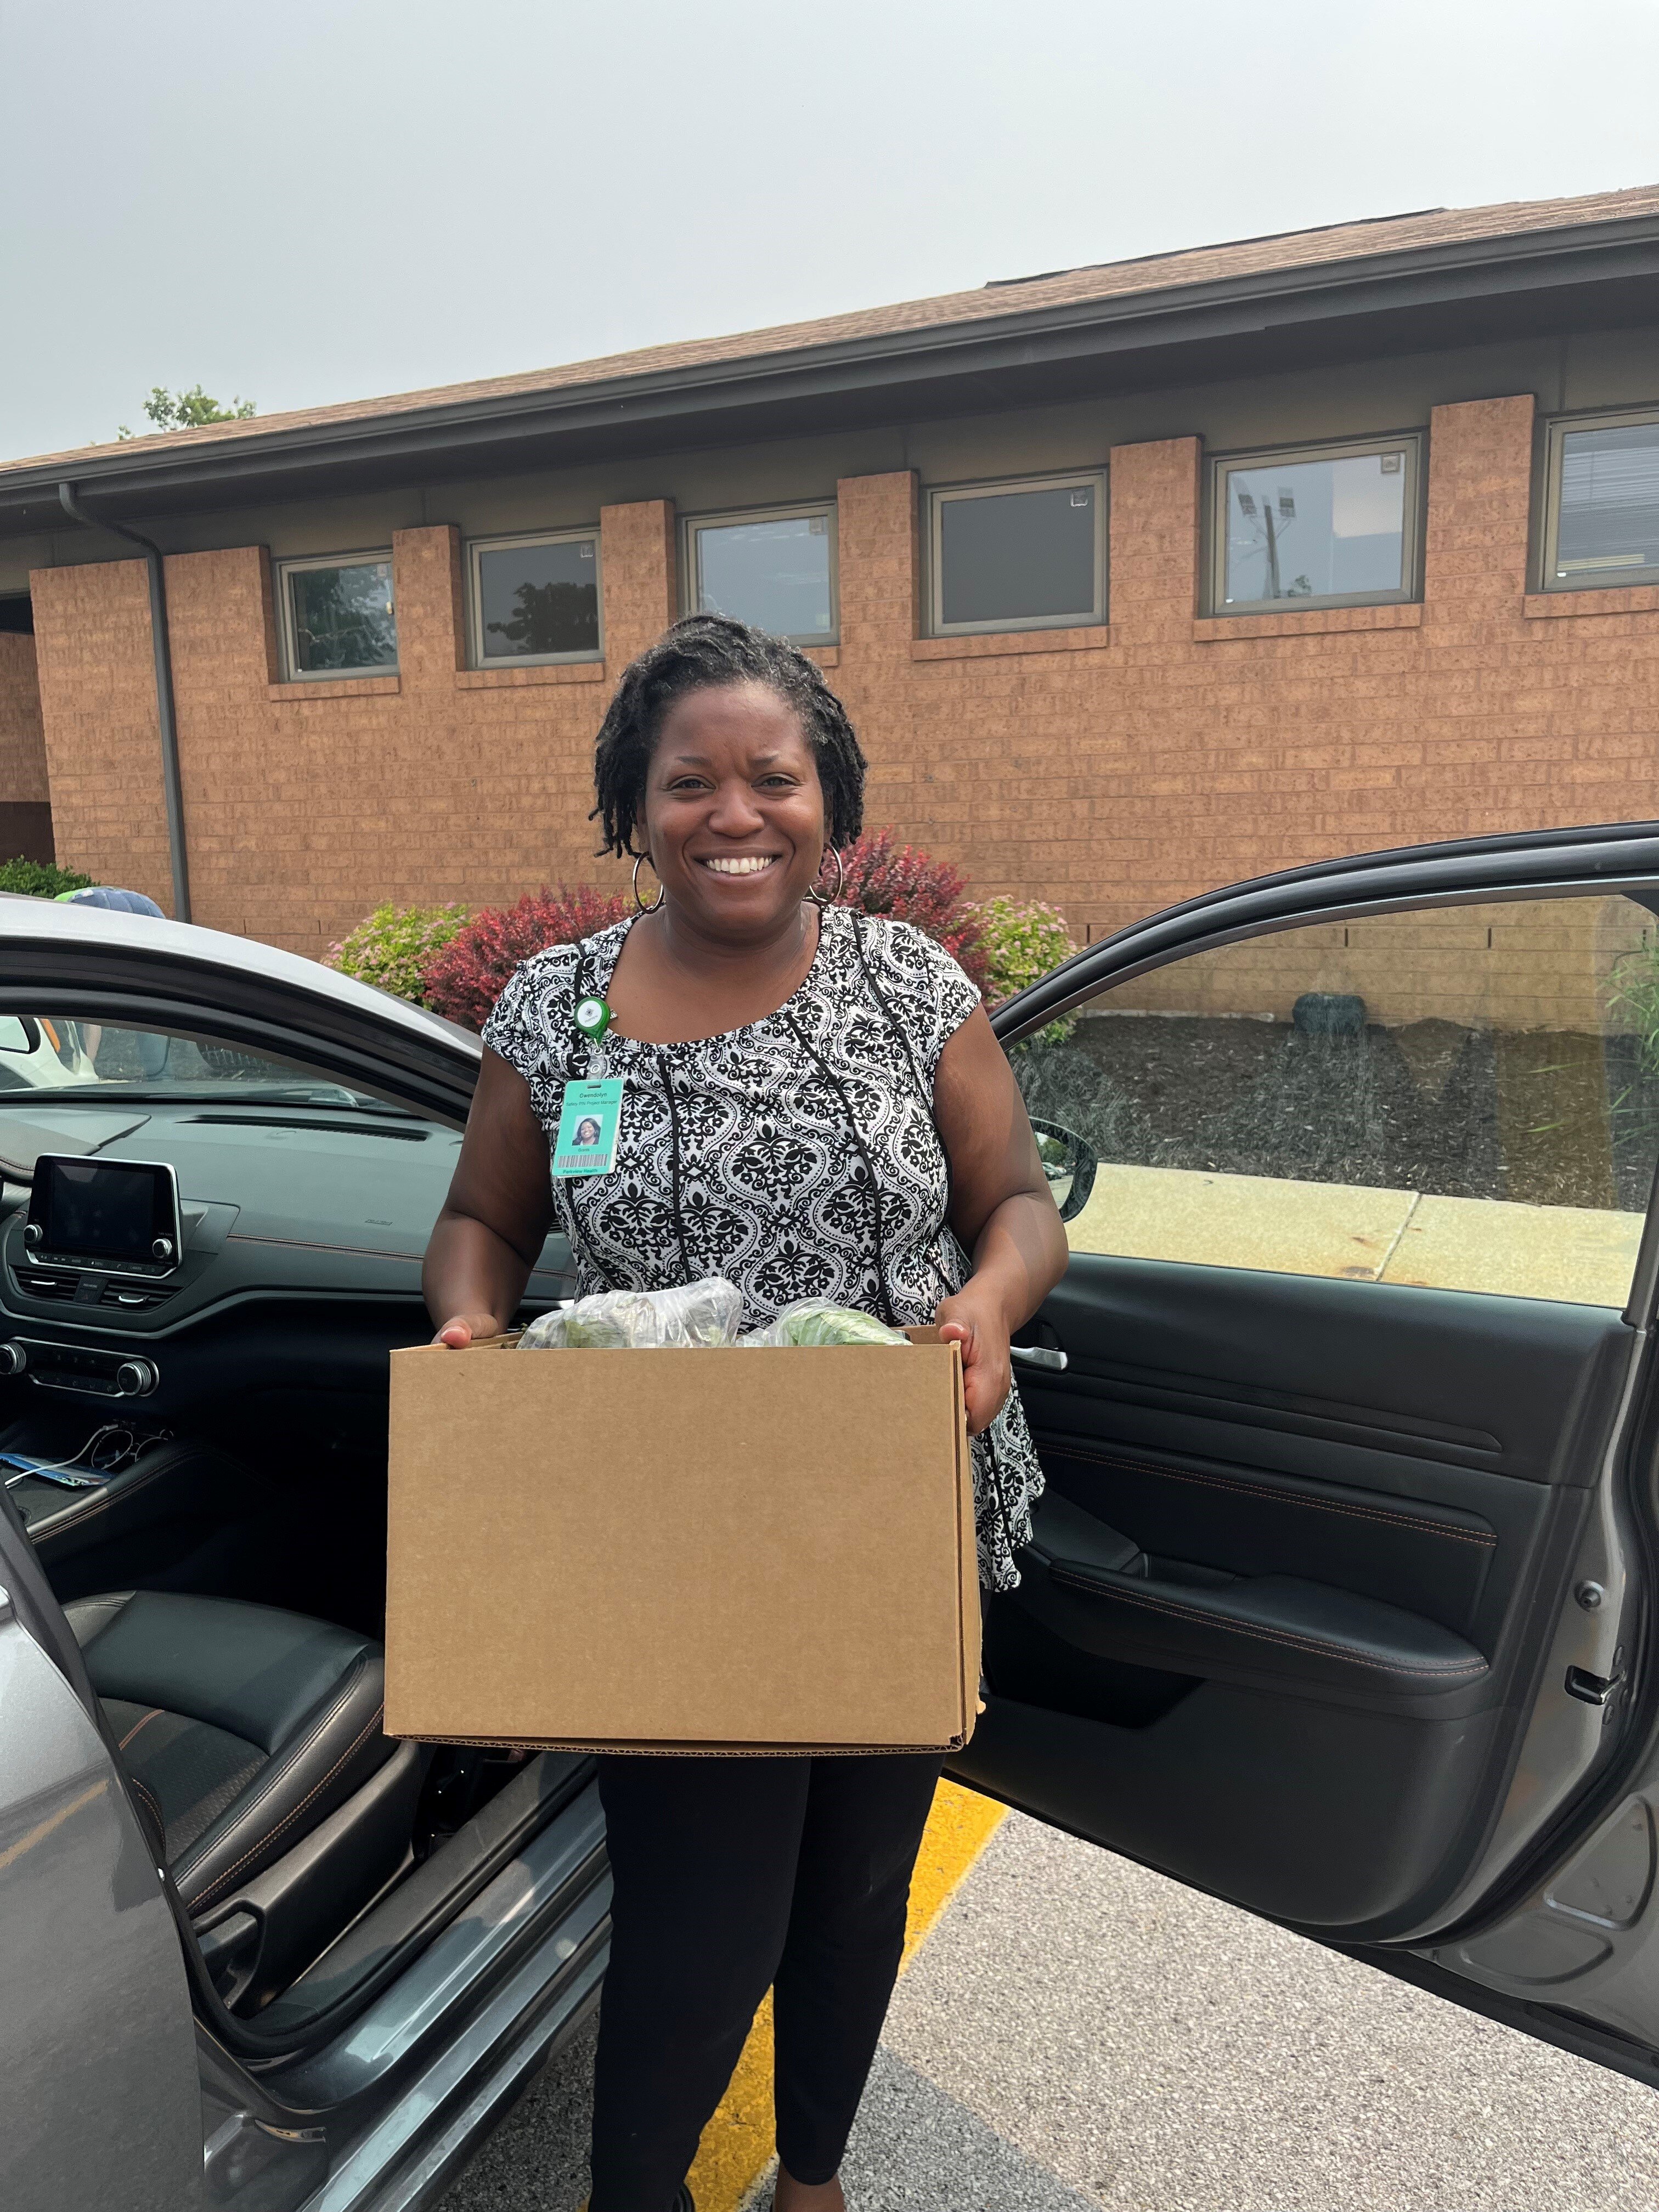 Gwendolyn Masterson gets ready to deliver a box of produce as part of the FreshFoods4Youth program offered through Parkview.